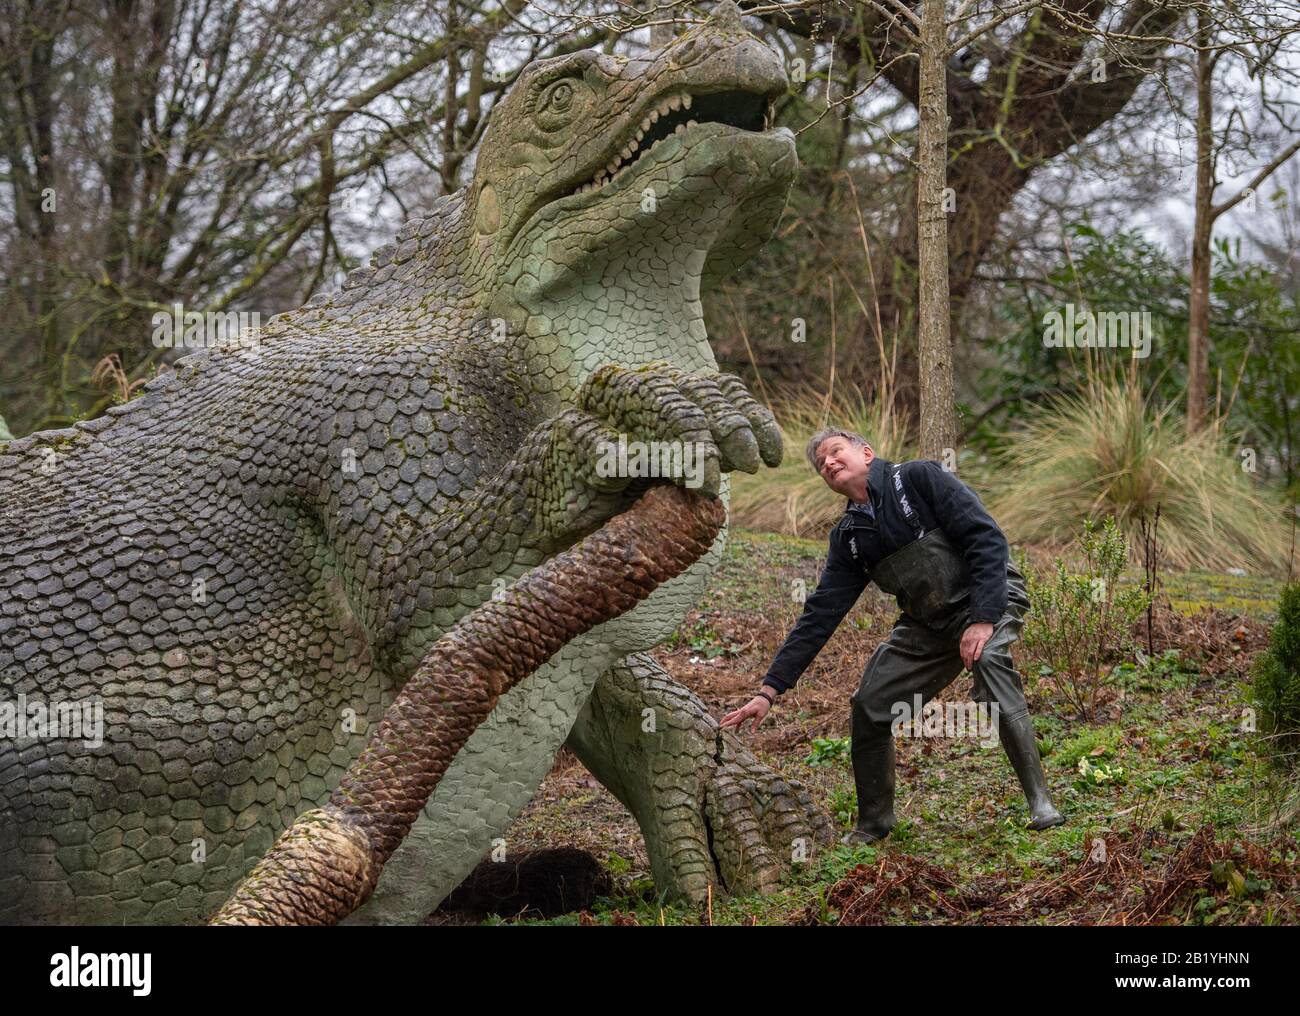 Simon Buteux from Historic England with an Iguanadon sculpture, part of the Crystal Palace Dinosuars, in Crystal Palace Park, London. The 30 Grade I-listed statues, constructed in the 1850s, have been added to Historic England's Heritage at Risk Register after experts found large cracks on the bodies and limbs and in danger of losing toes, teeth and tails. Stock Photo